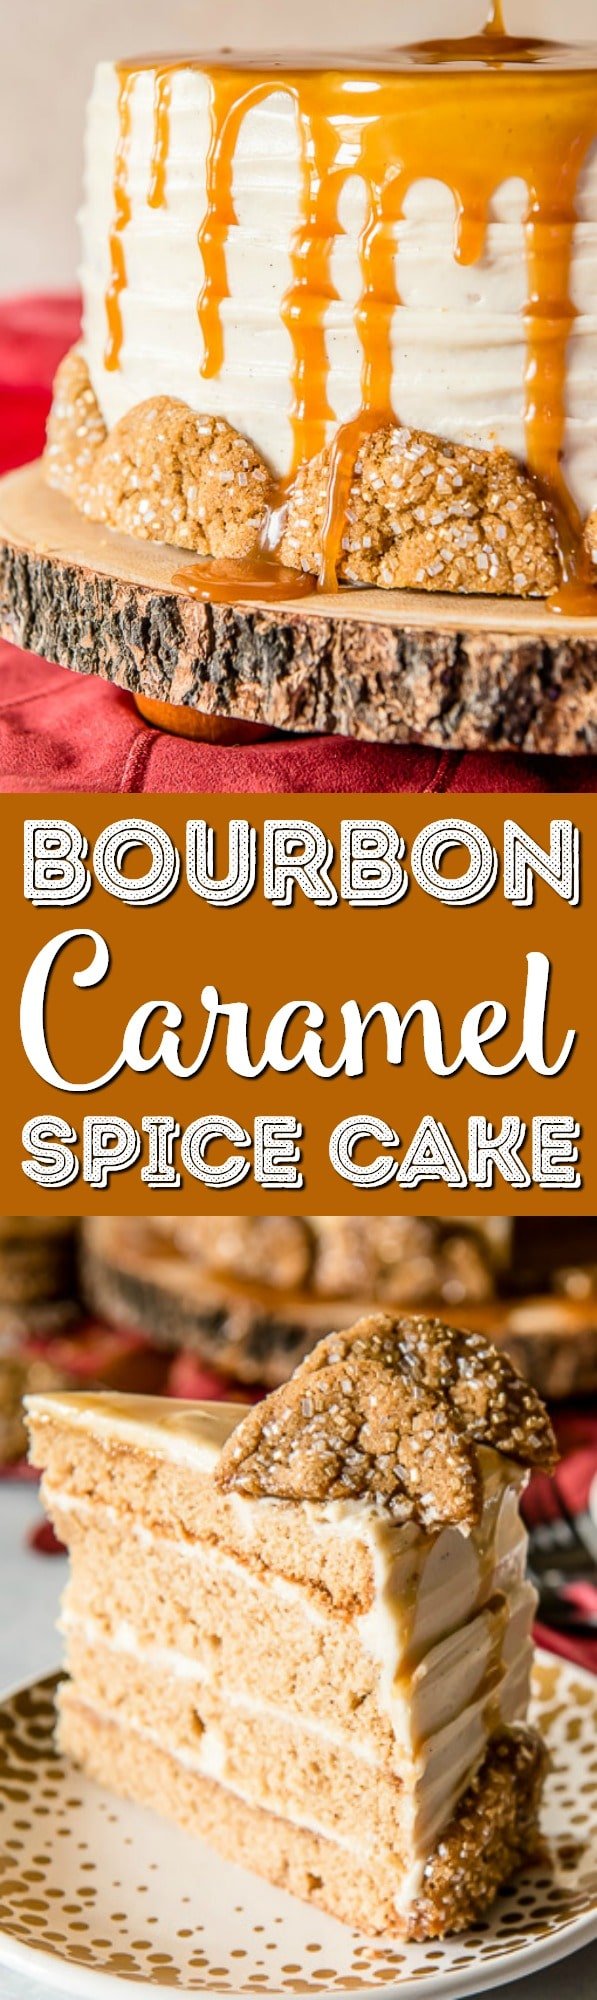 Seasonal and comforting, this Bourbon Caramel Spice Cake is full of fall flavors, covered in a caramel bourbon cream cheese buttercream, and garnished with your favorite gingersnap cookies! via @sugarandsoulco